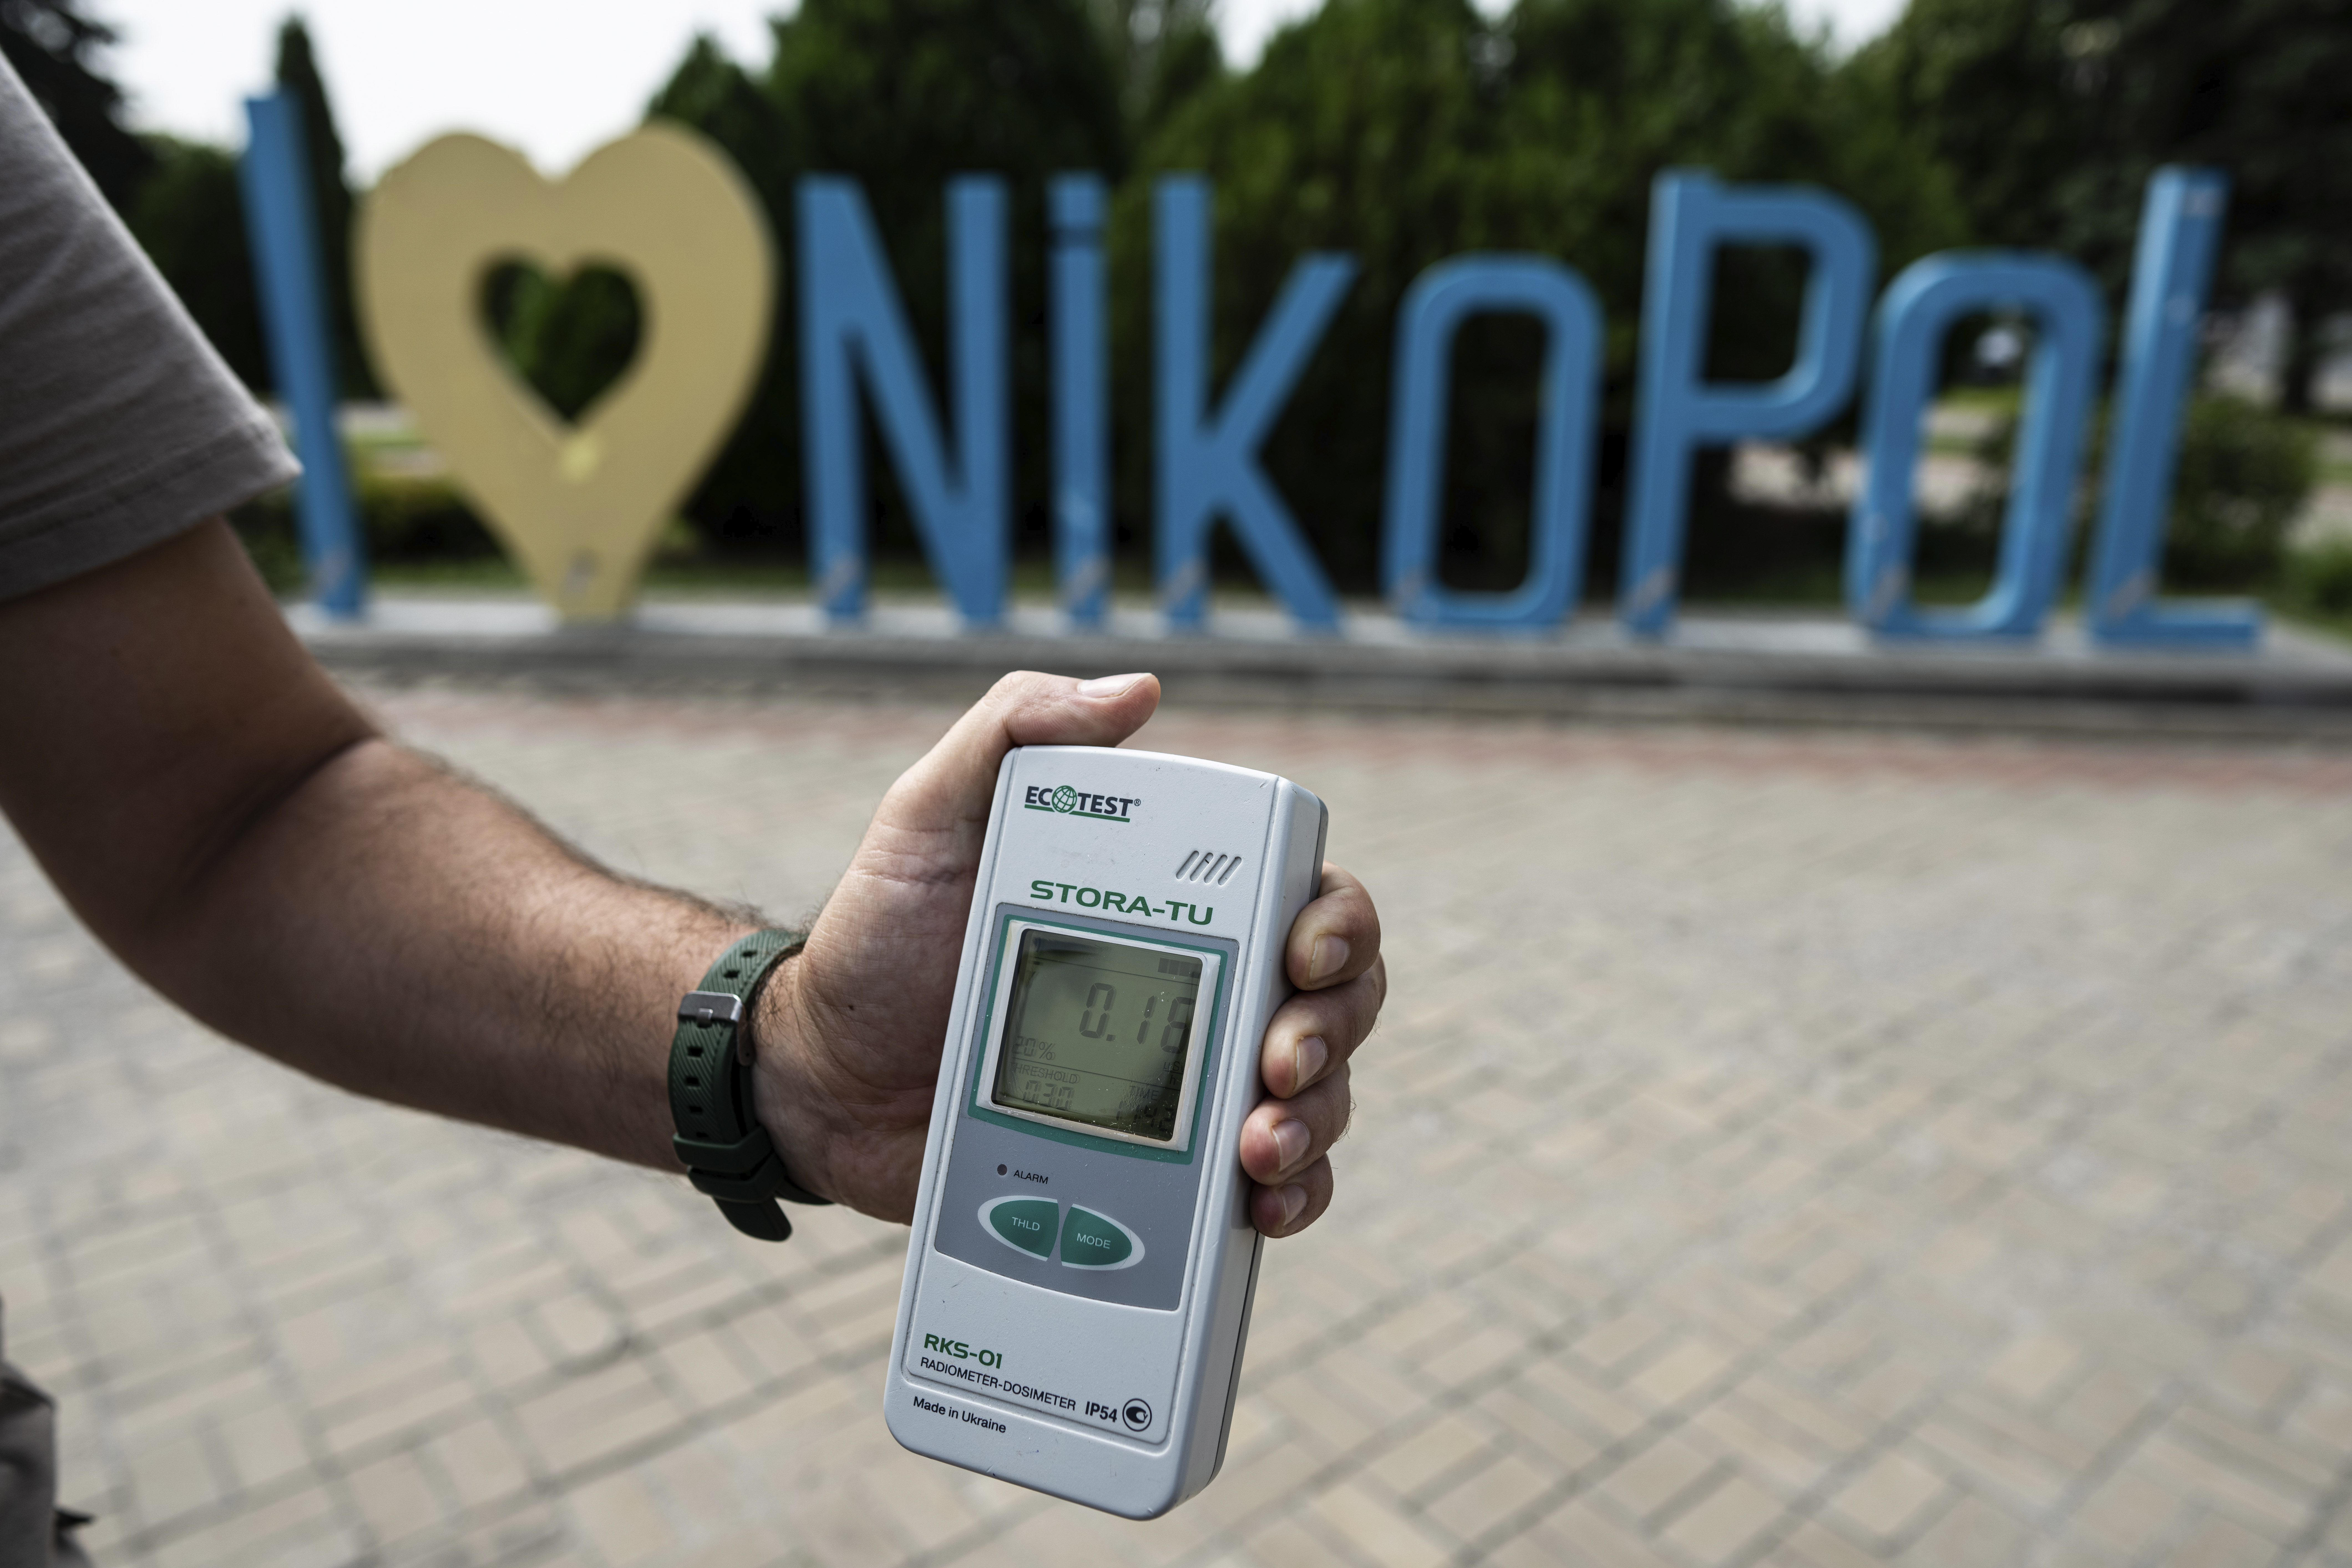 A Geiger counter shows rising radiation levels in Nikopol, Ukraine on August 22, 2022.  (AP Photo/Evgeniy Maloletka, File)